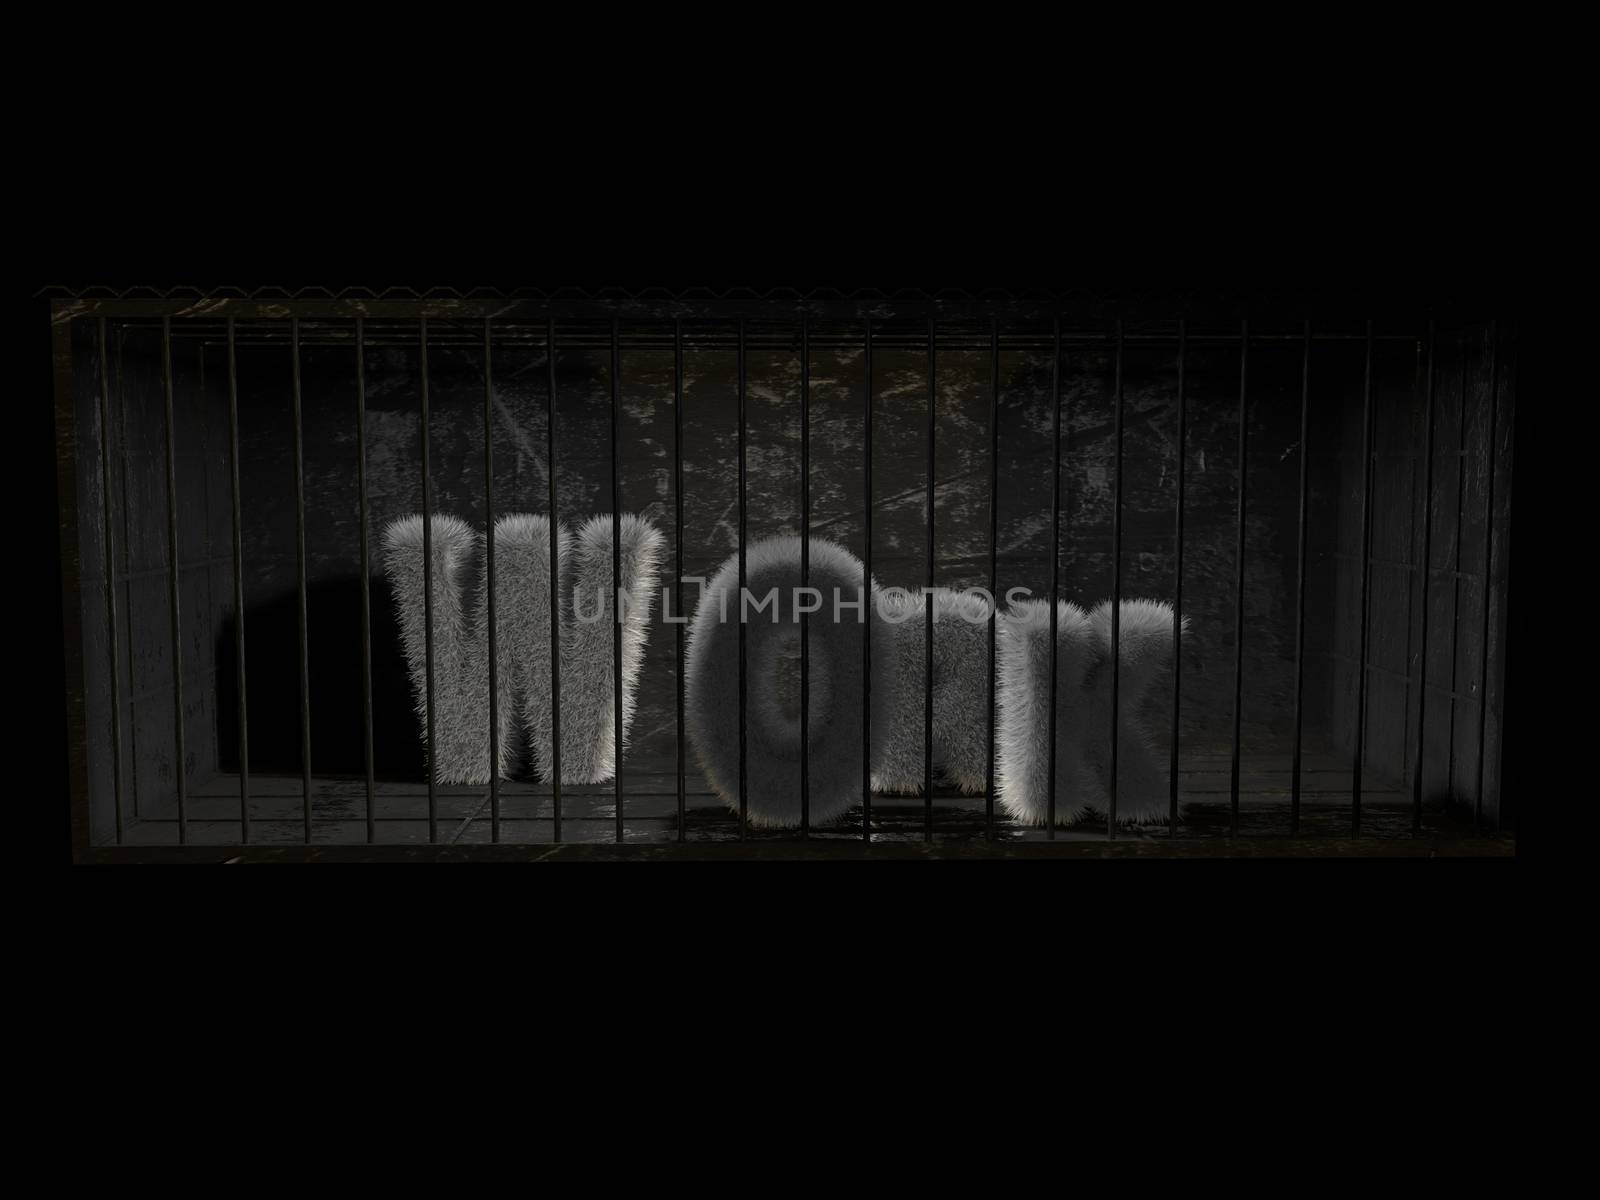 A fluffy word (work) with white hair behind bars with black background.